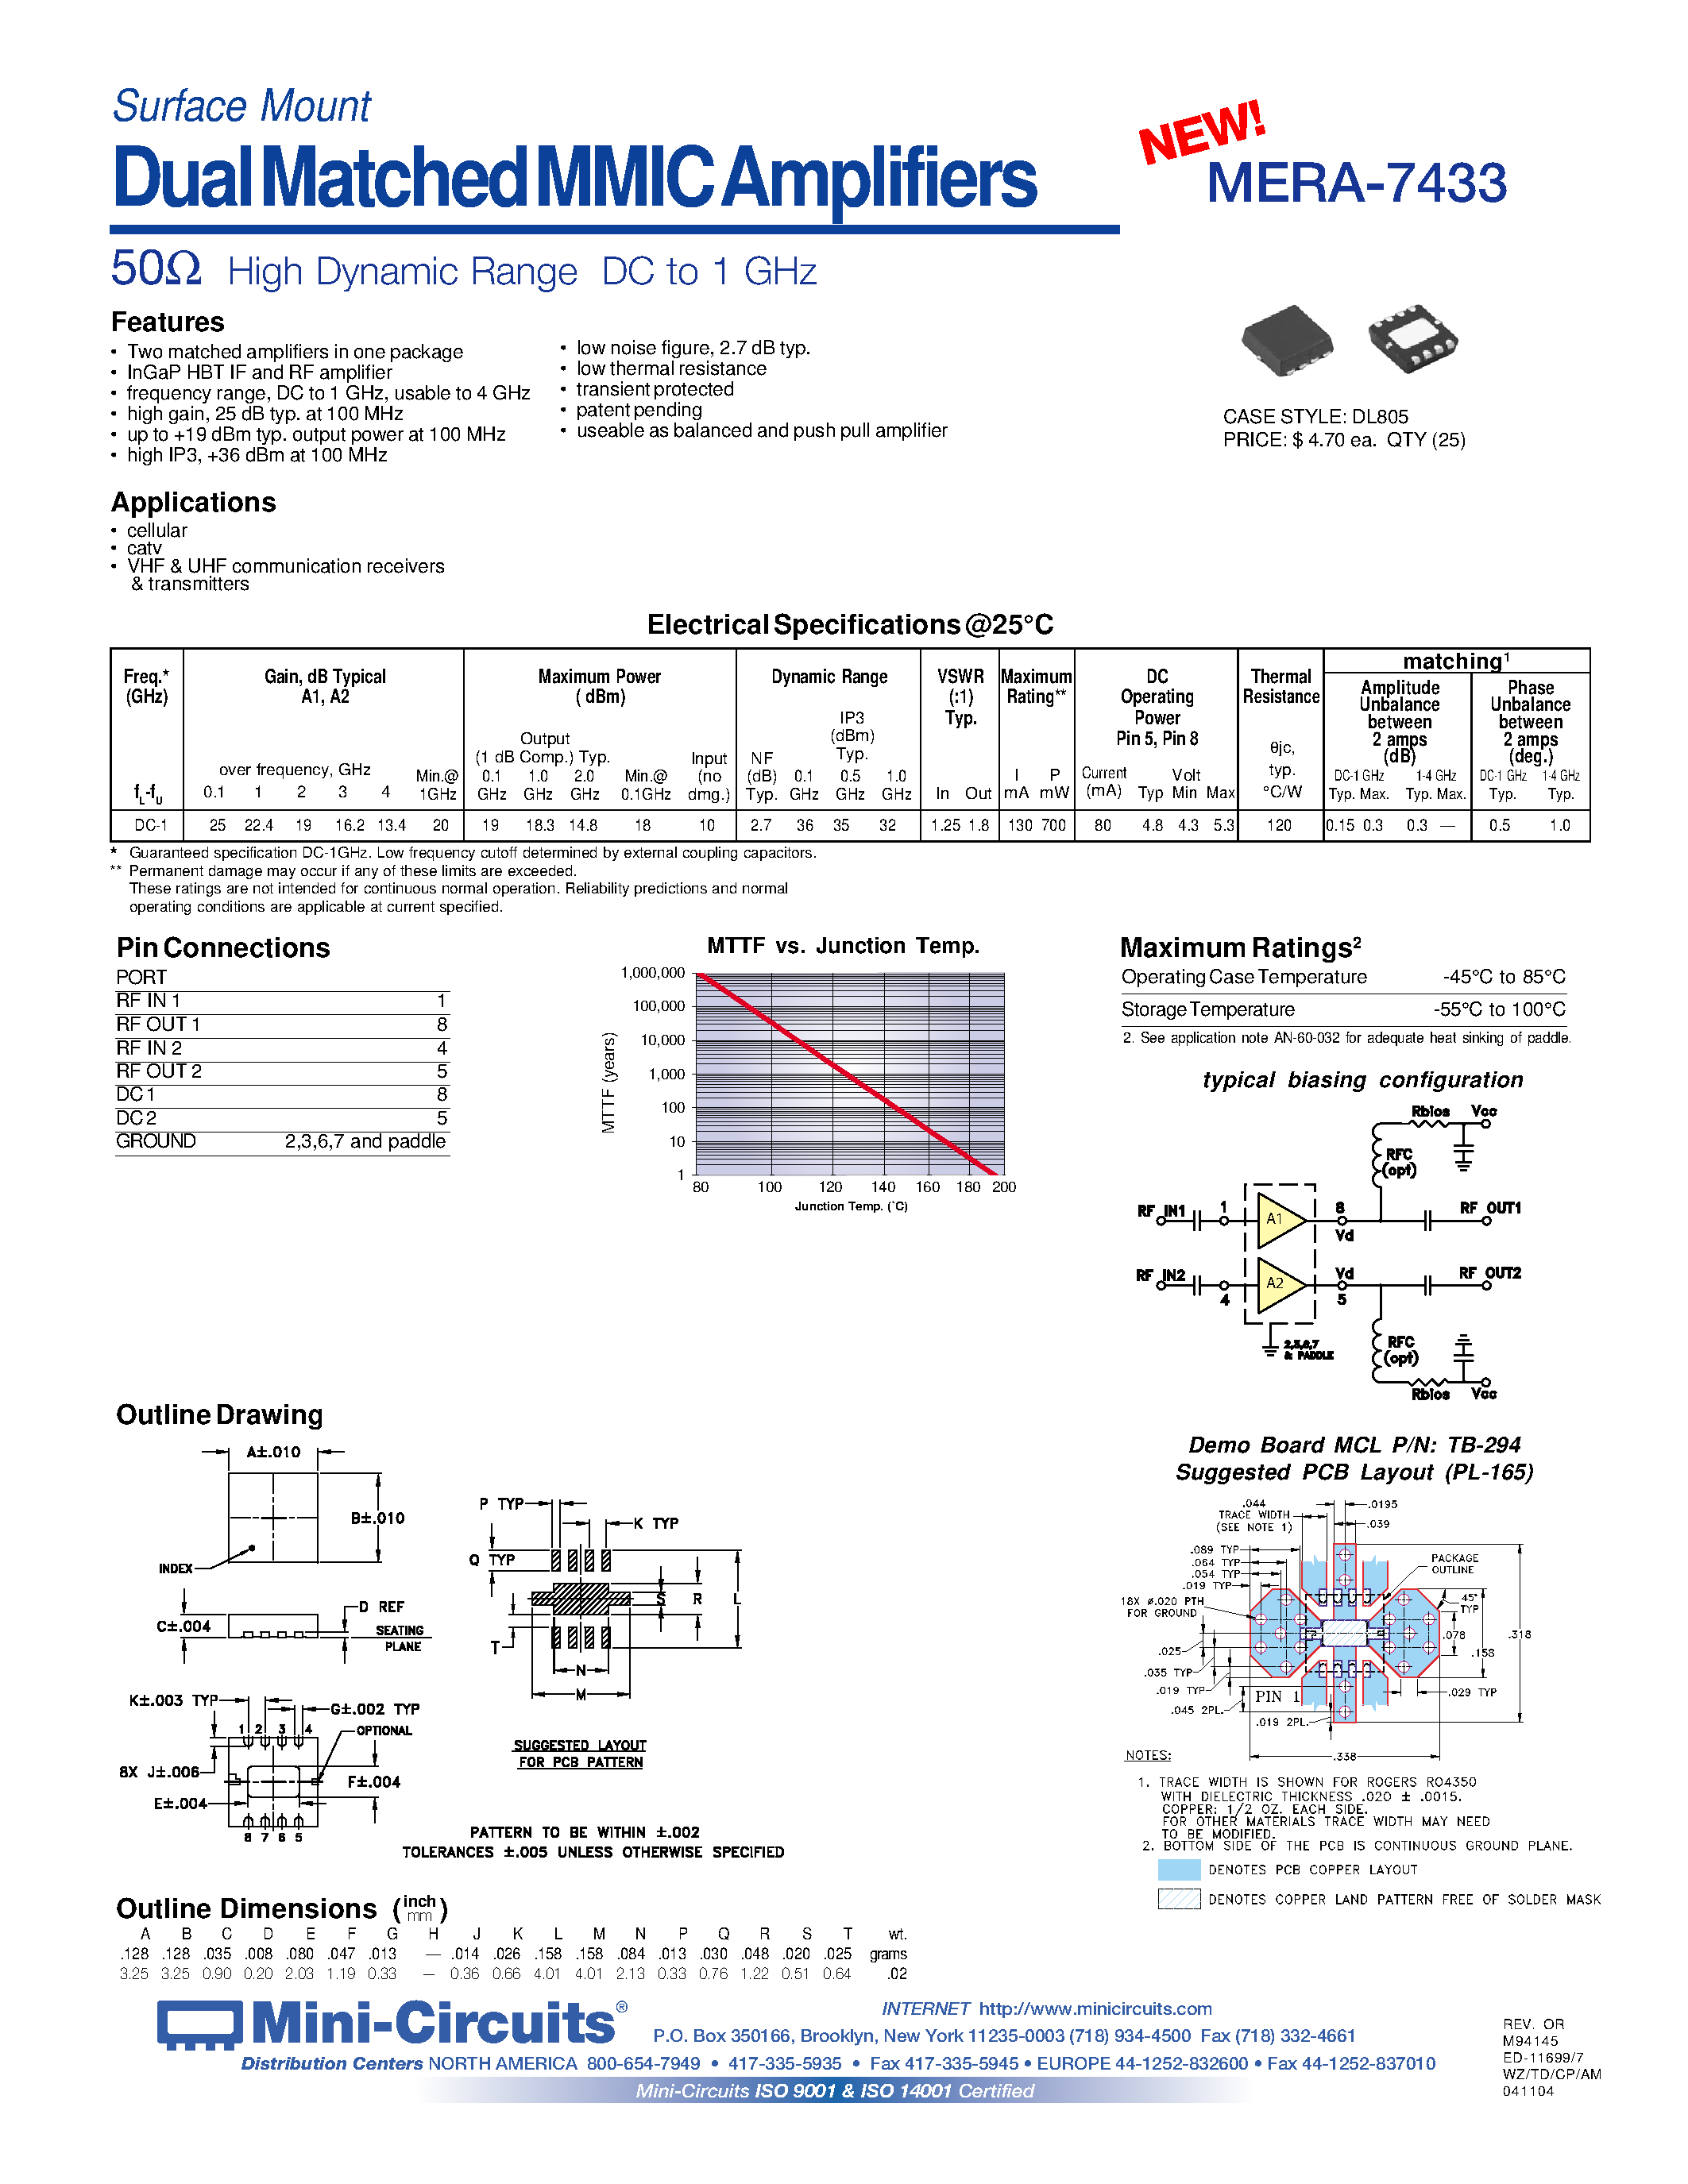 Datasheet MERA-7433 - Surface Mount DualMatchedMMICAmplifiers 50 High Dynamic Range DC to 1 GHz page 1